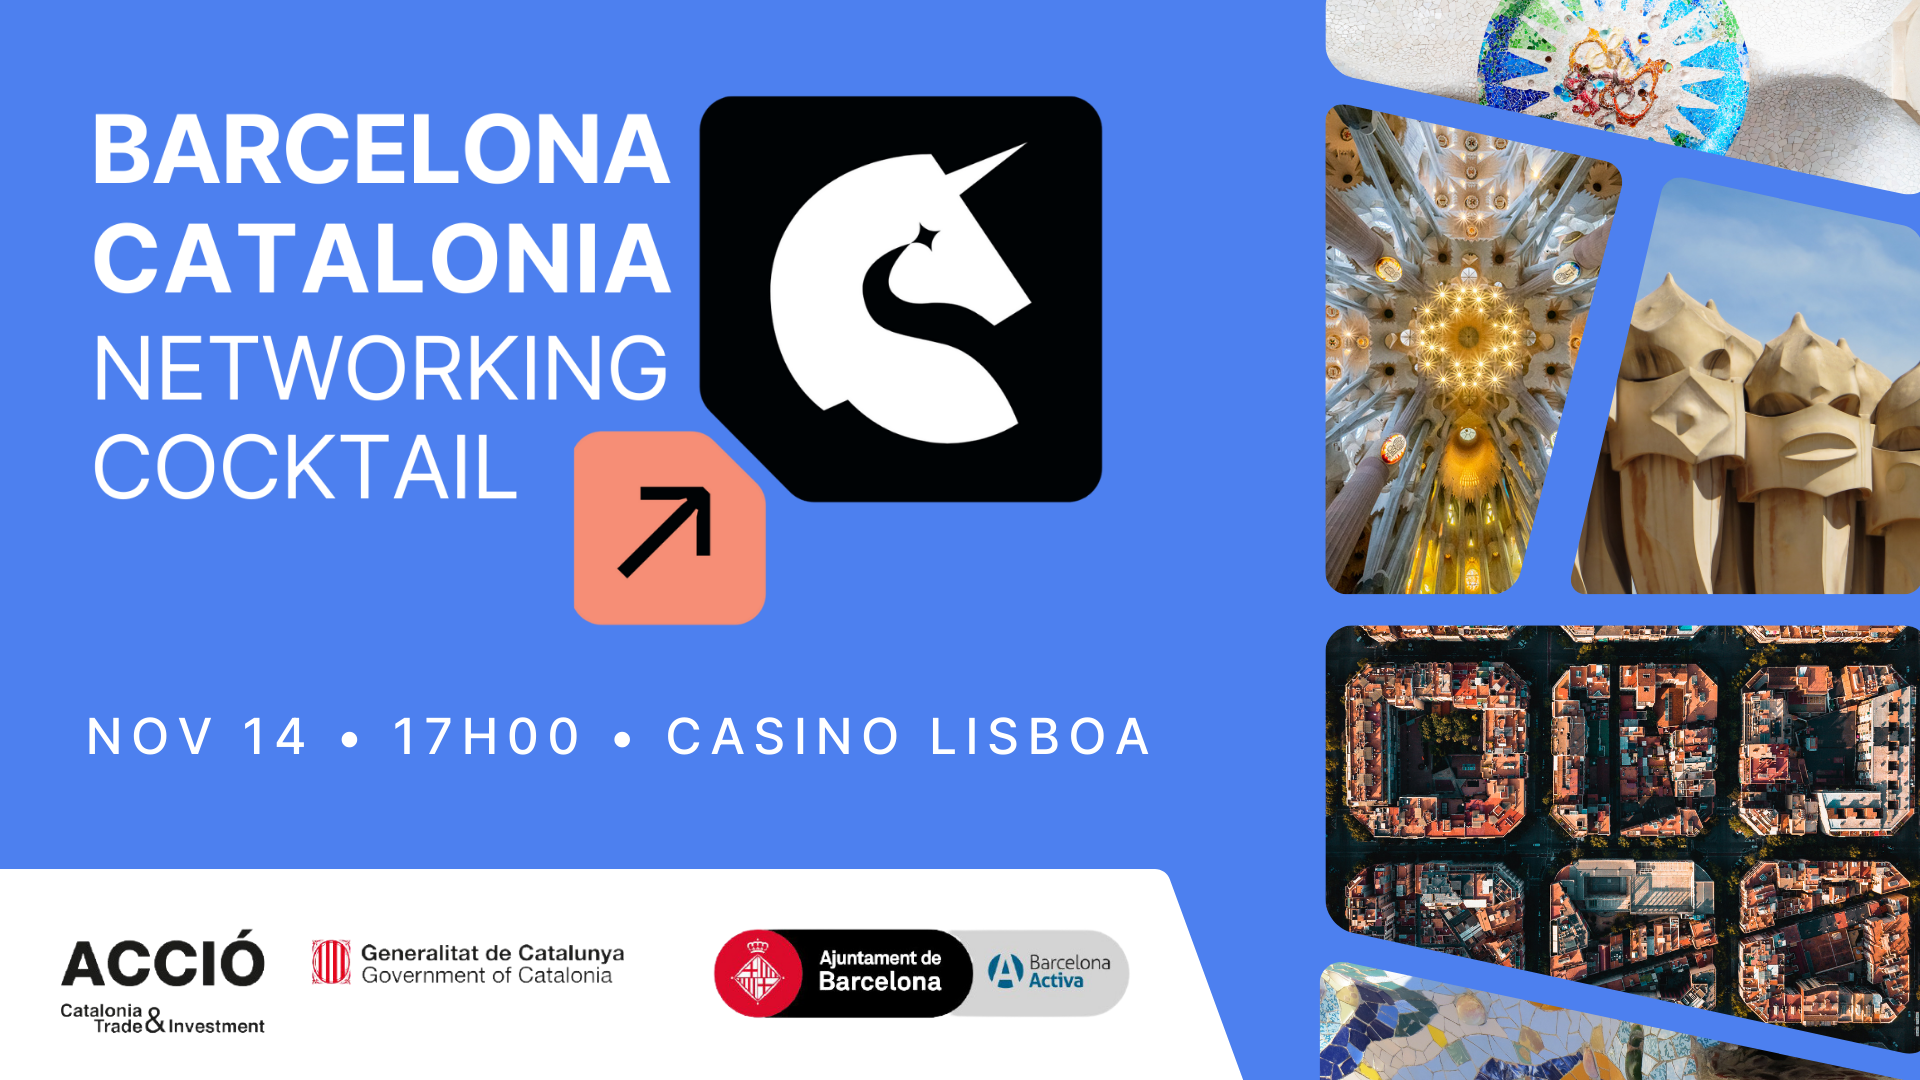 Barcelona – Catalonia, Networking Cocktail